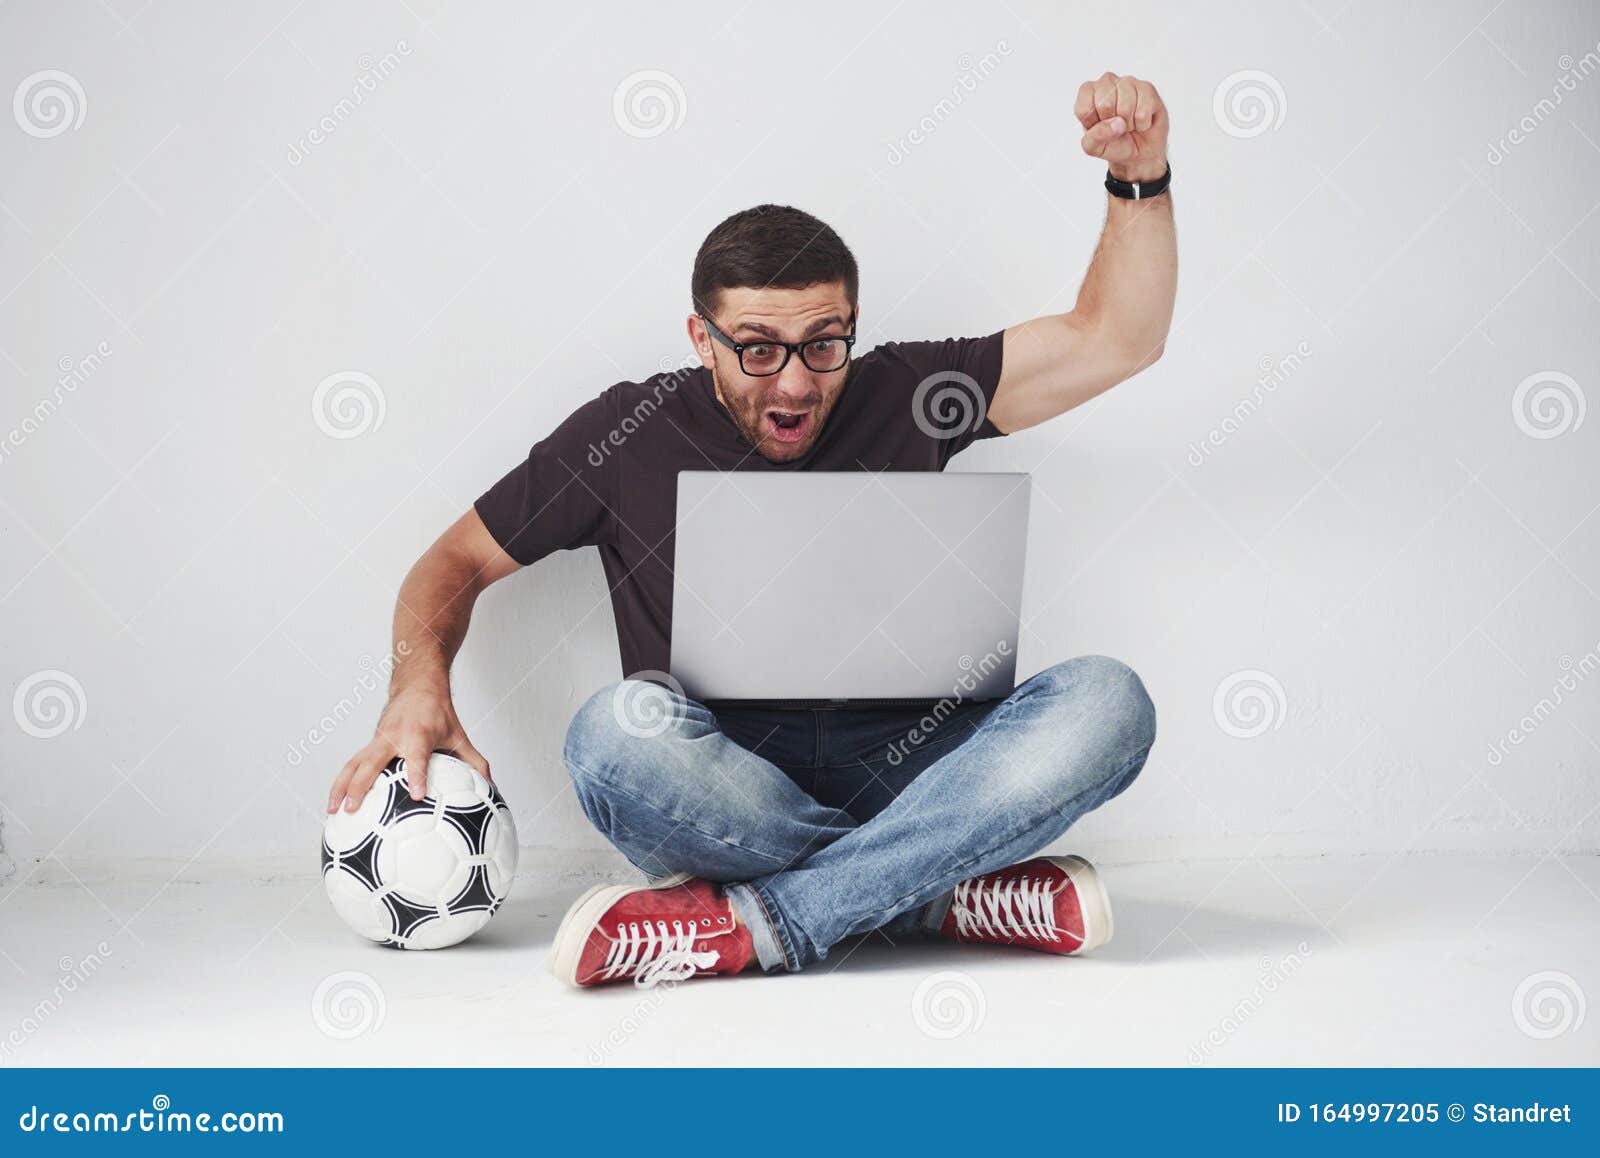 Excited Soccer Fan with a Football Isolated on White Background